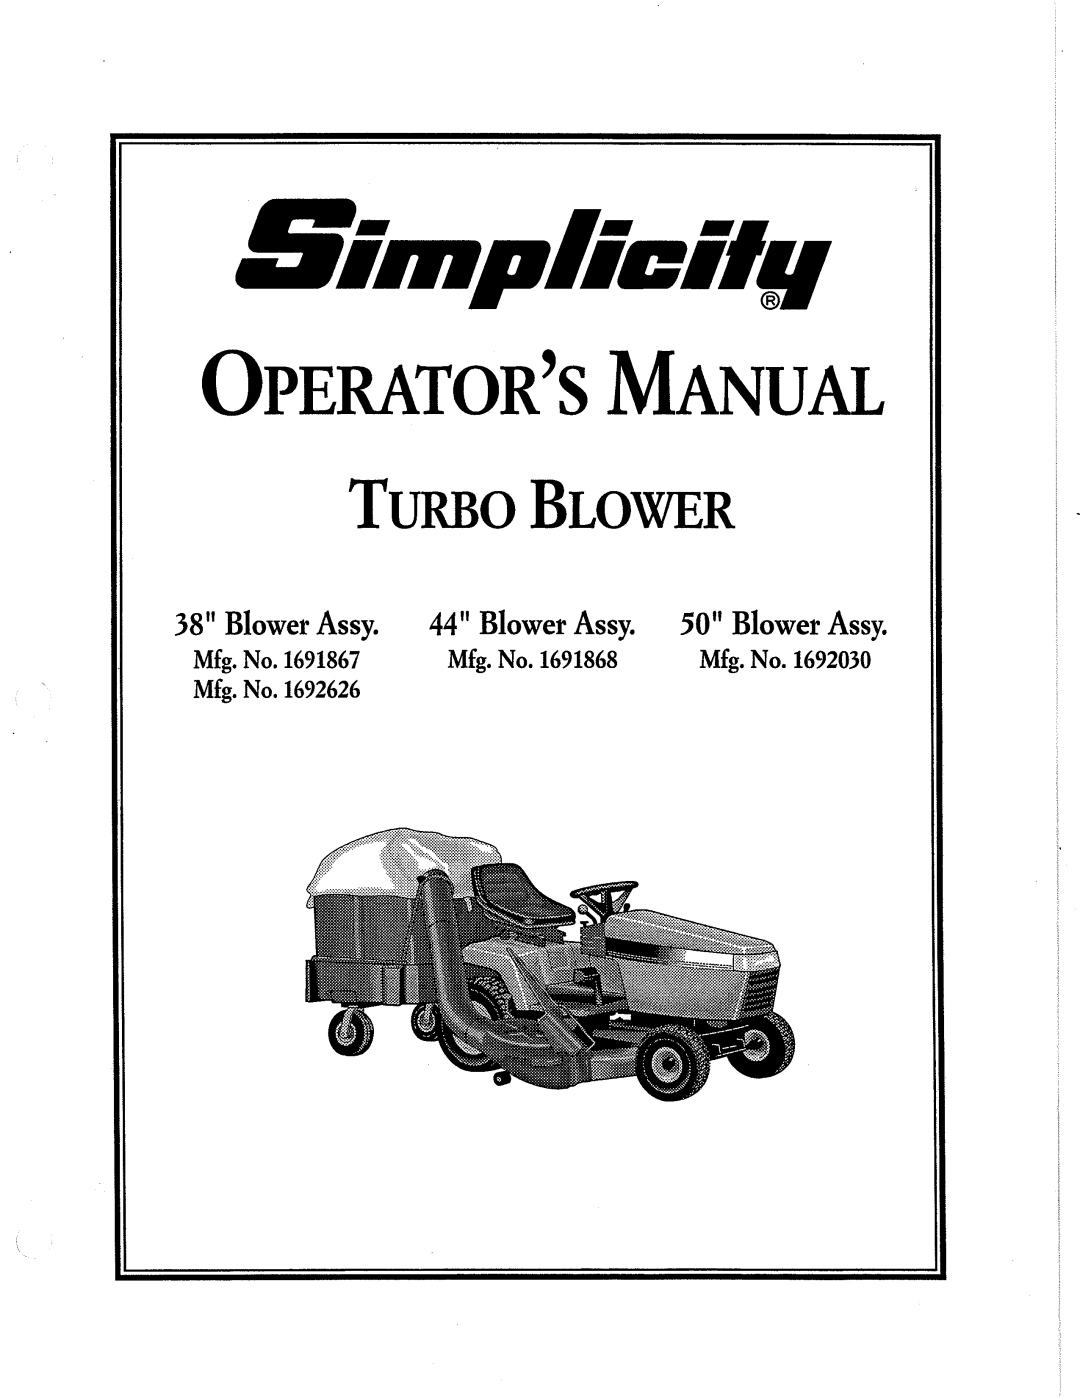 Simplicity 1693225, 1692626 manual Parts Manual, Turbo Collectors, Turbo Grass Collector Attachments For Tractors & Riders 